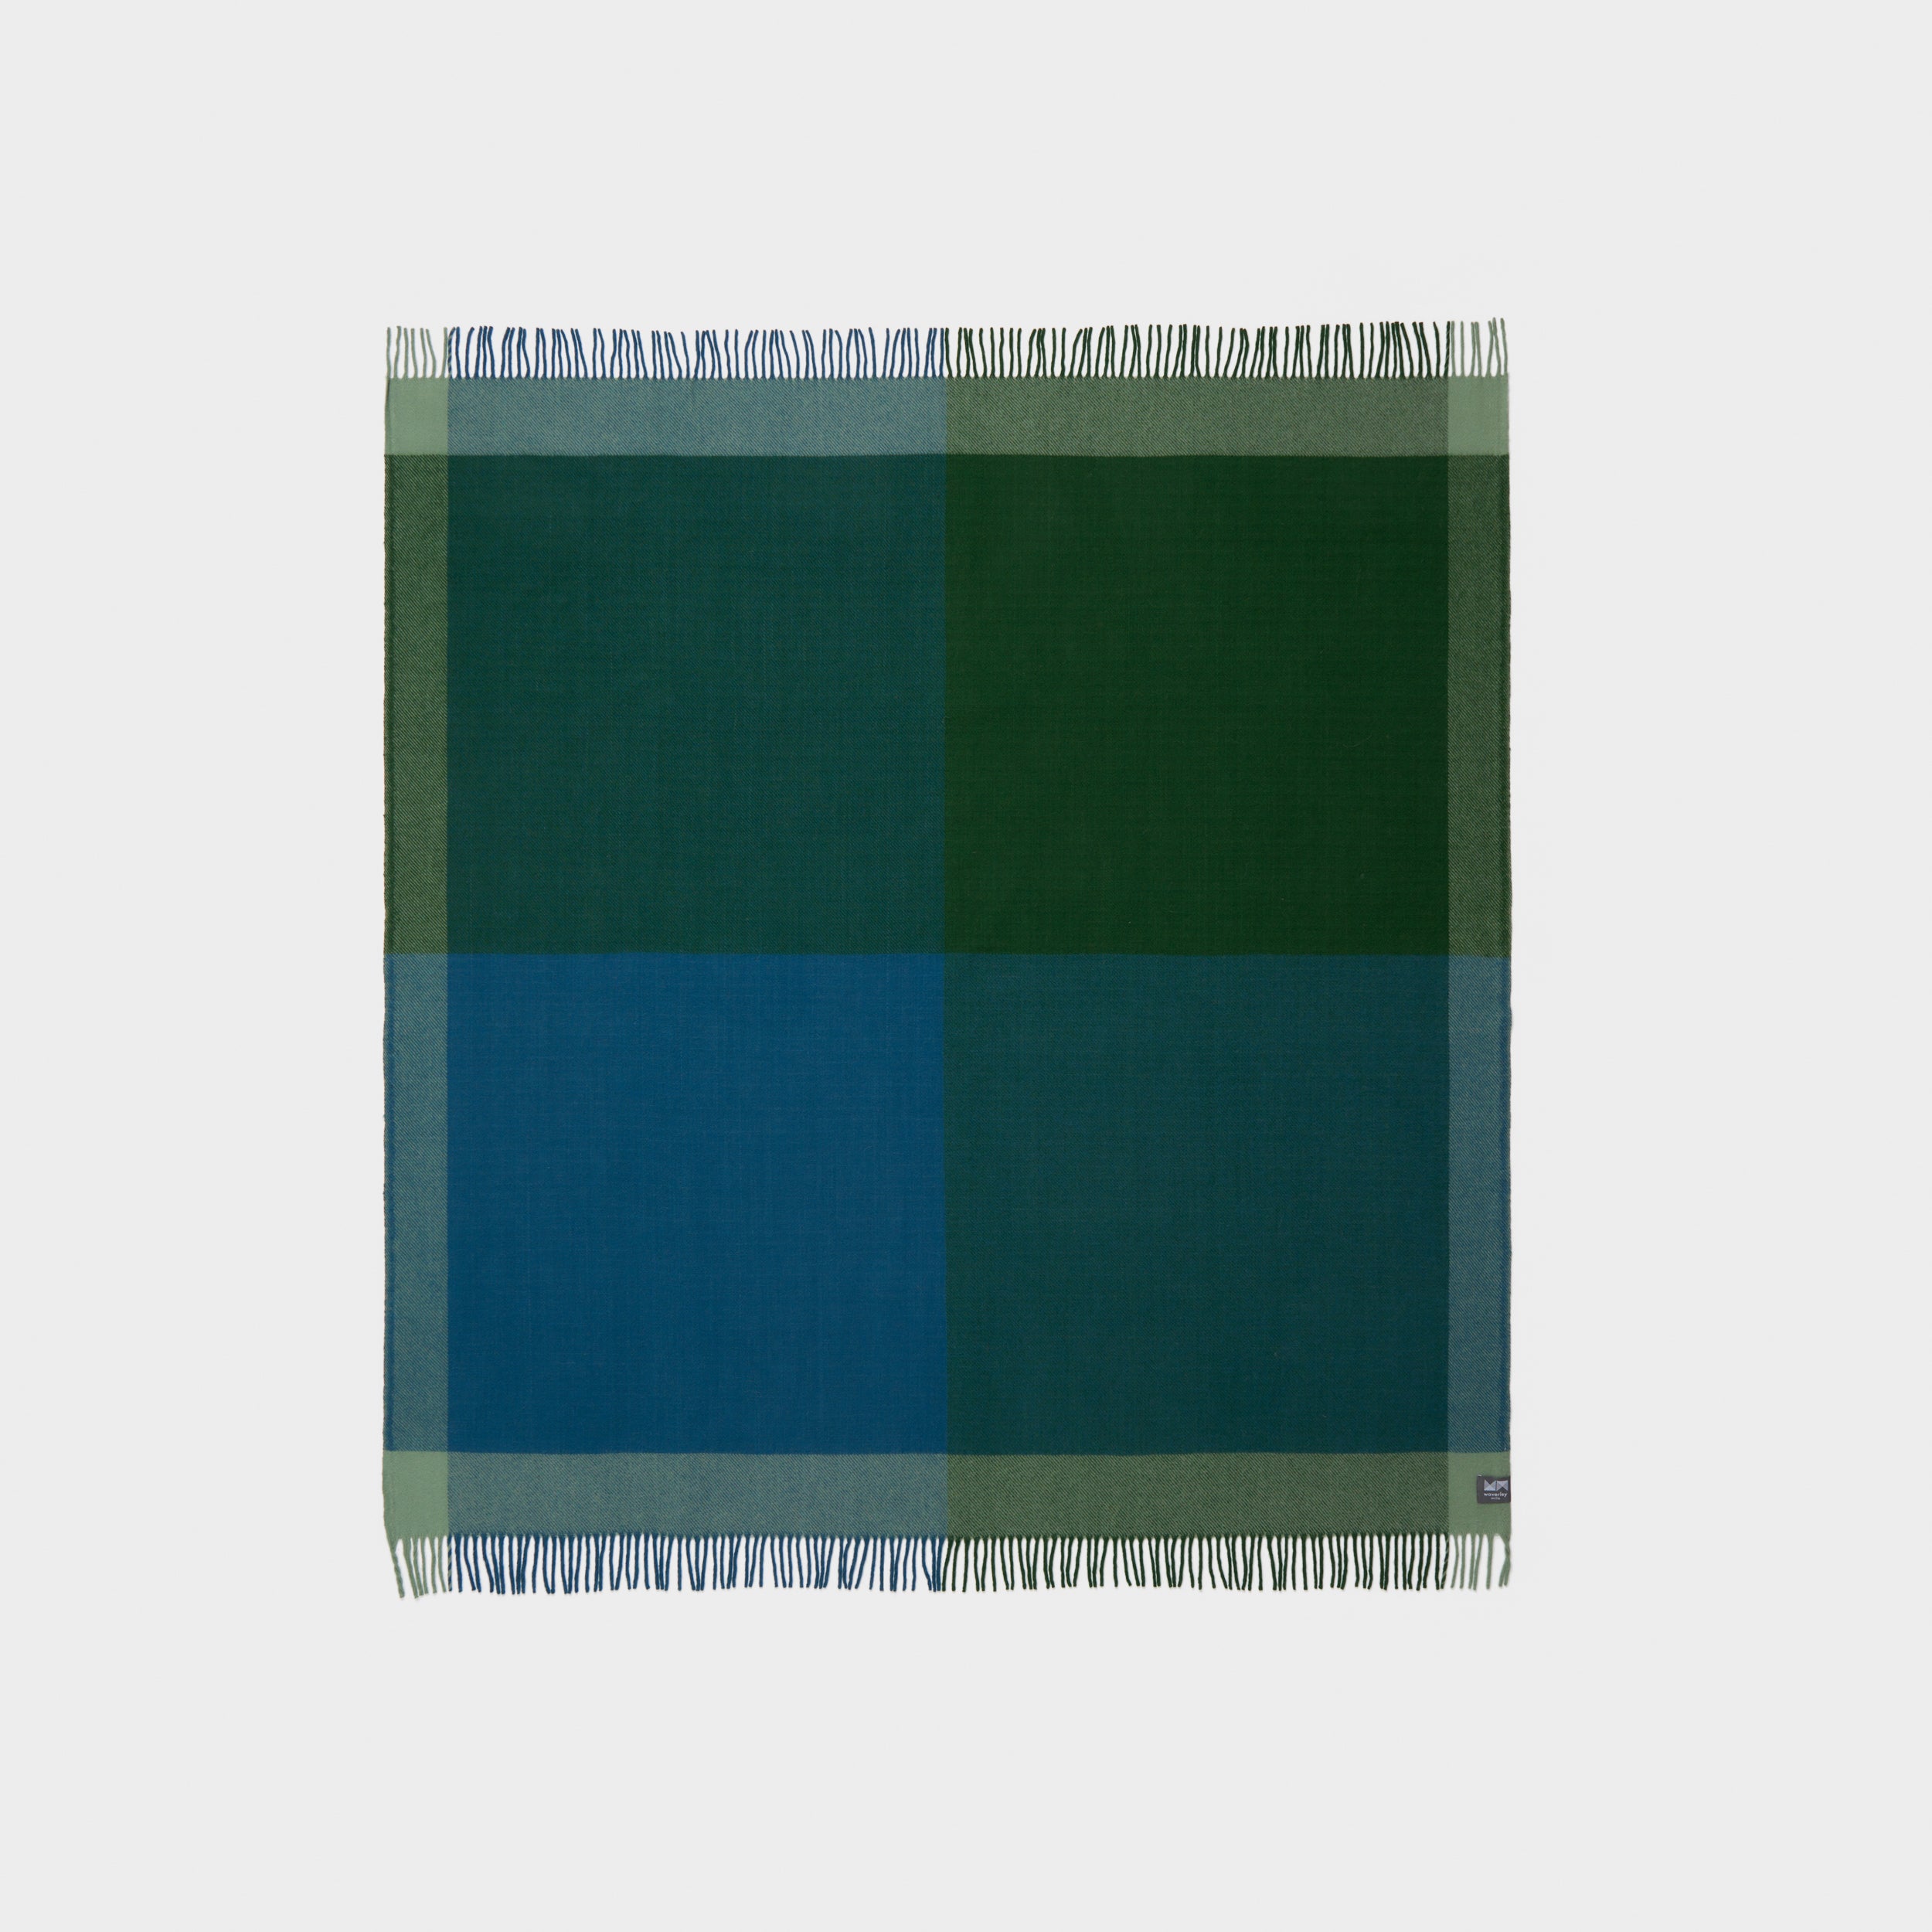 Full view of a graze picnic rug in green and blue.